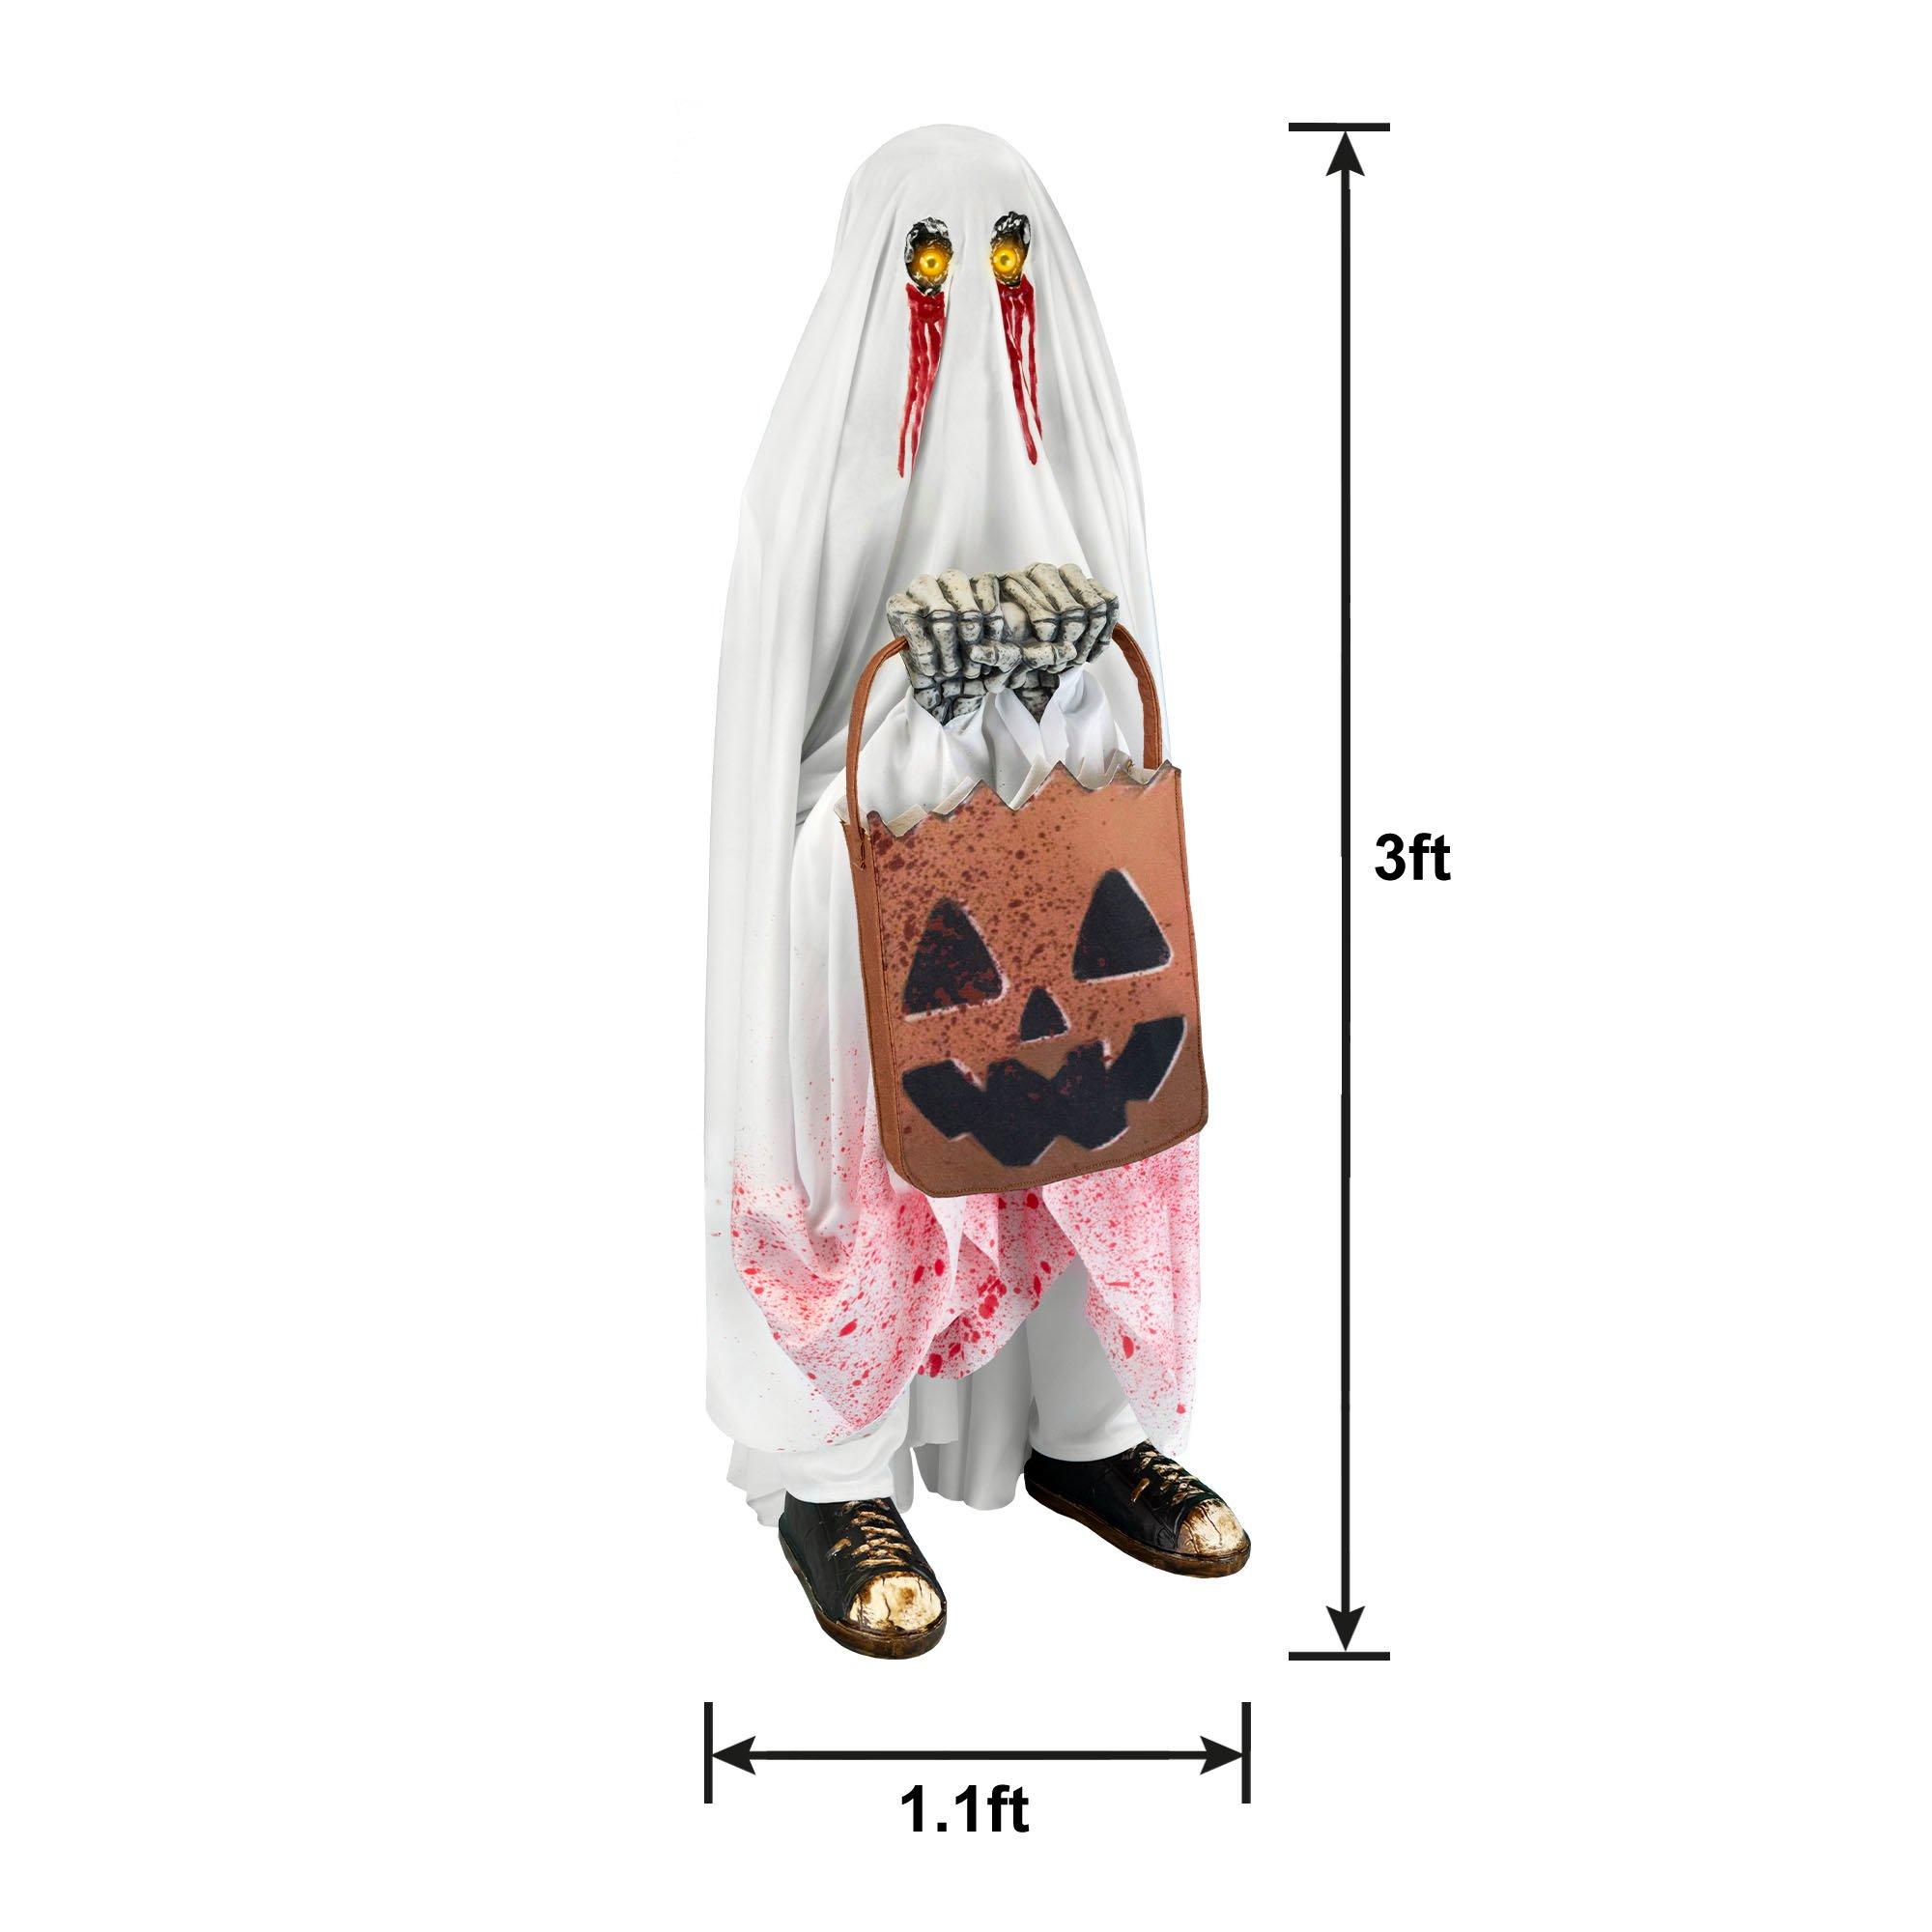 Animatronic Light-Up Bloody Ghost Trick-or-Treater, 3ft | Party City